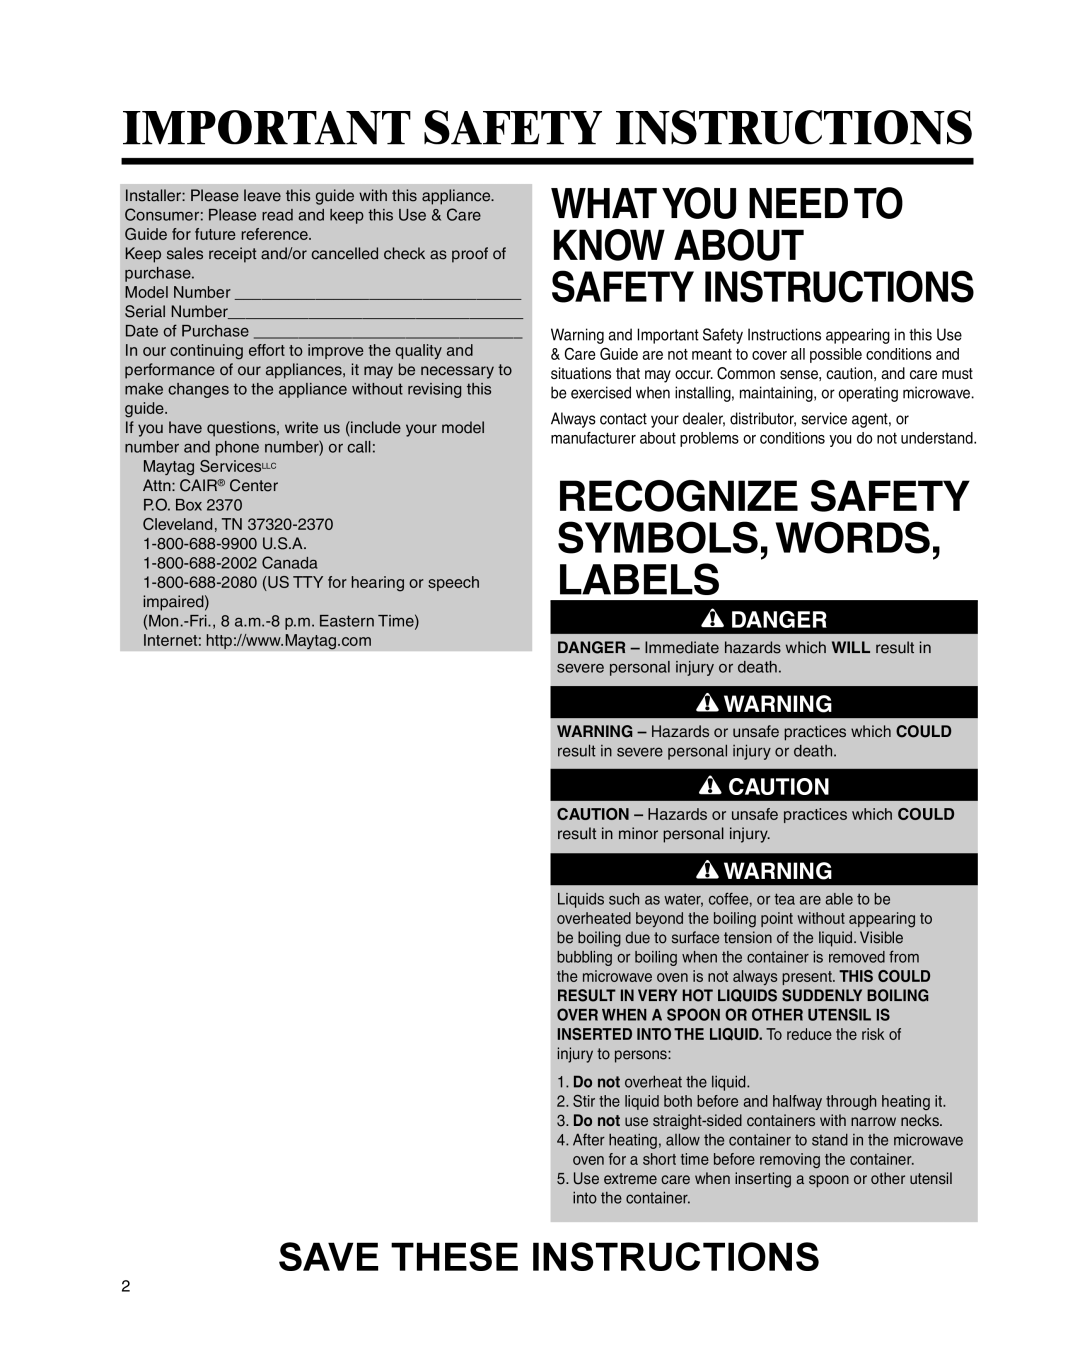 Maytag UMC5200BCS Important Safety Instructions, Recognize Safety Symbols, Words, Labels, Save These Instructions, Danger 